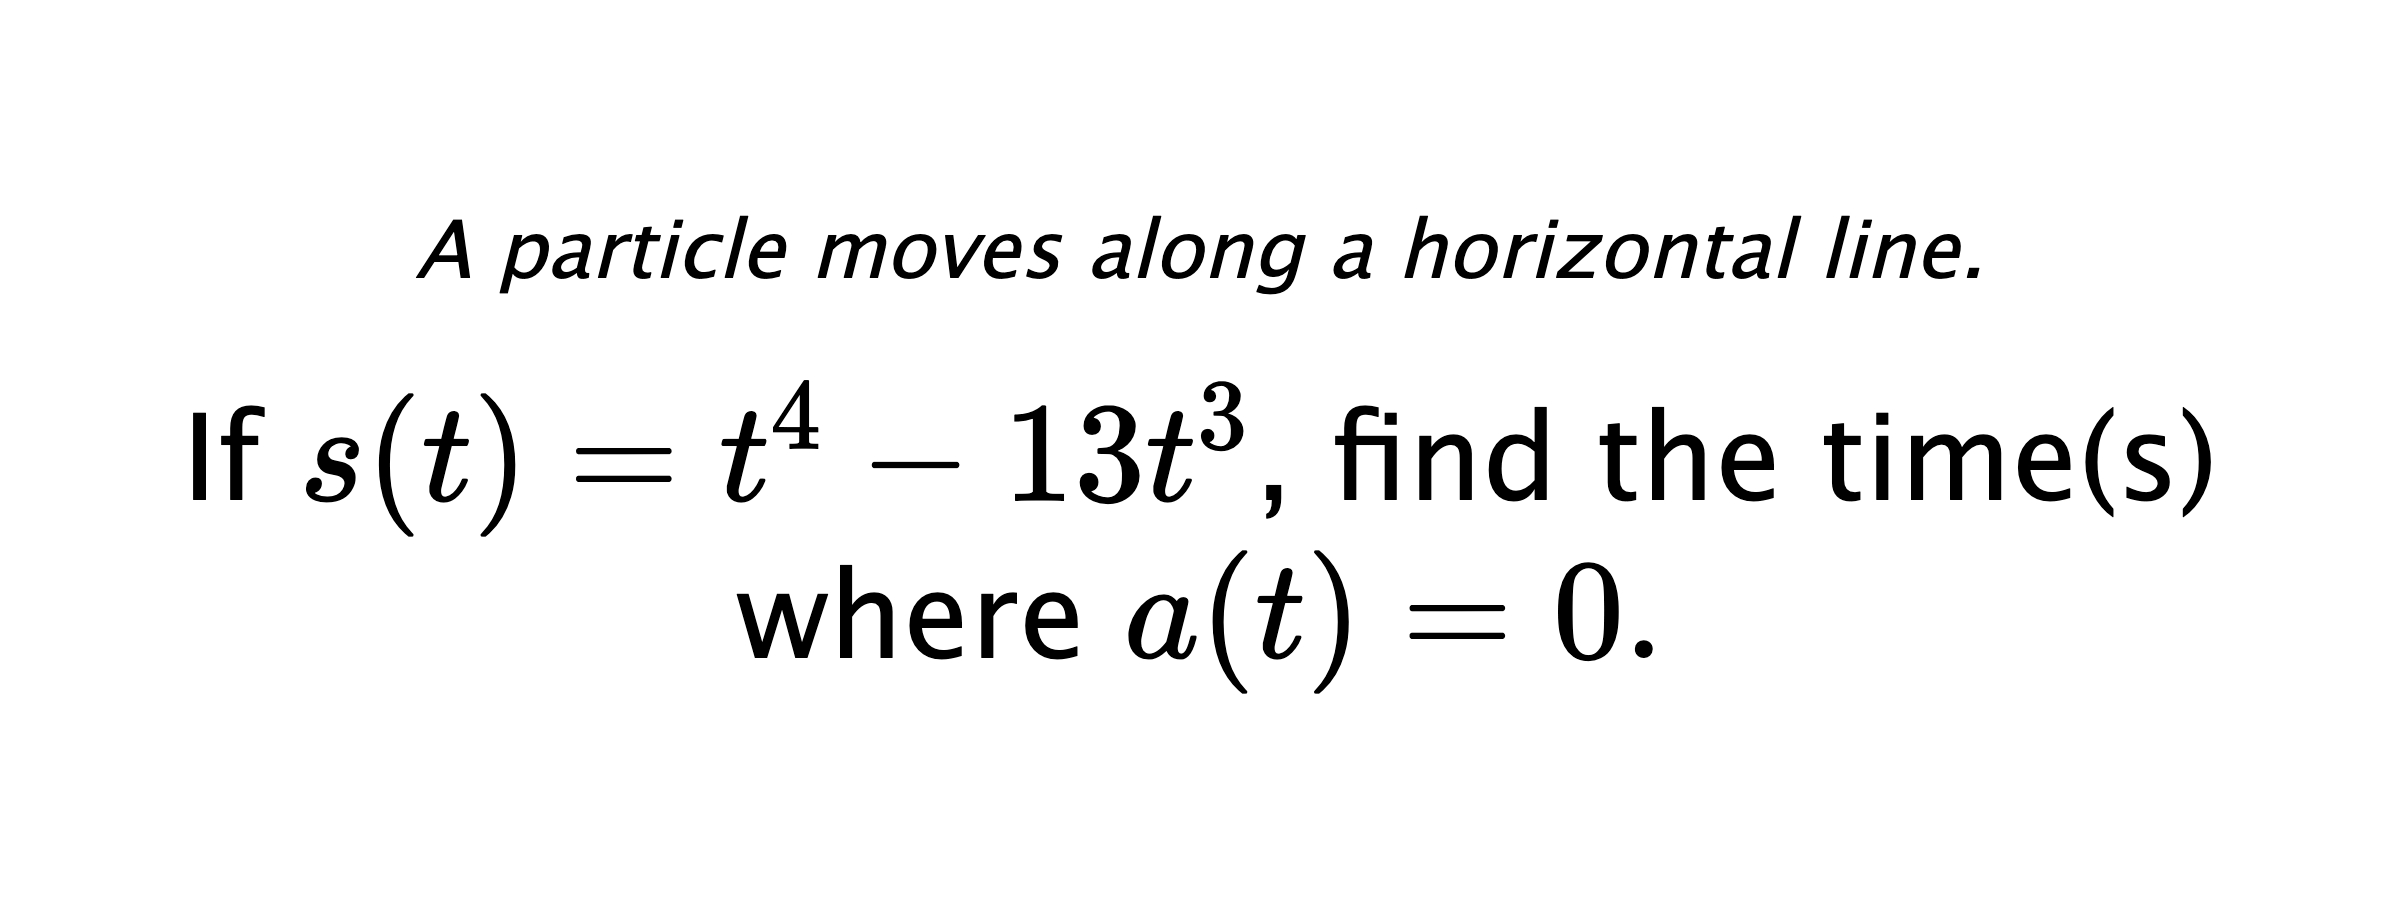 A particle moves along a horizontal line. If $ s(t)=t^4-13t^3 $, find the time(s) where $ a(t)=0 .$